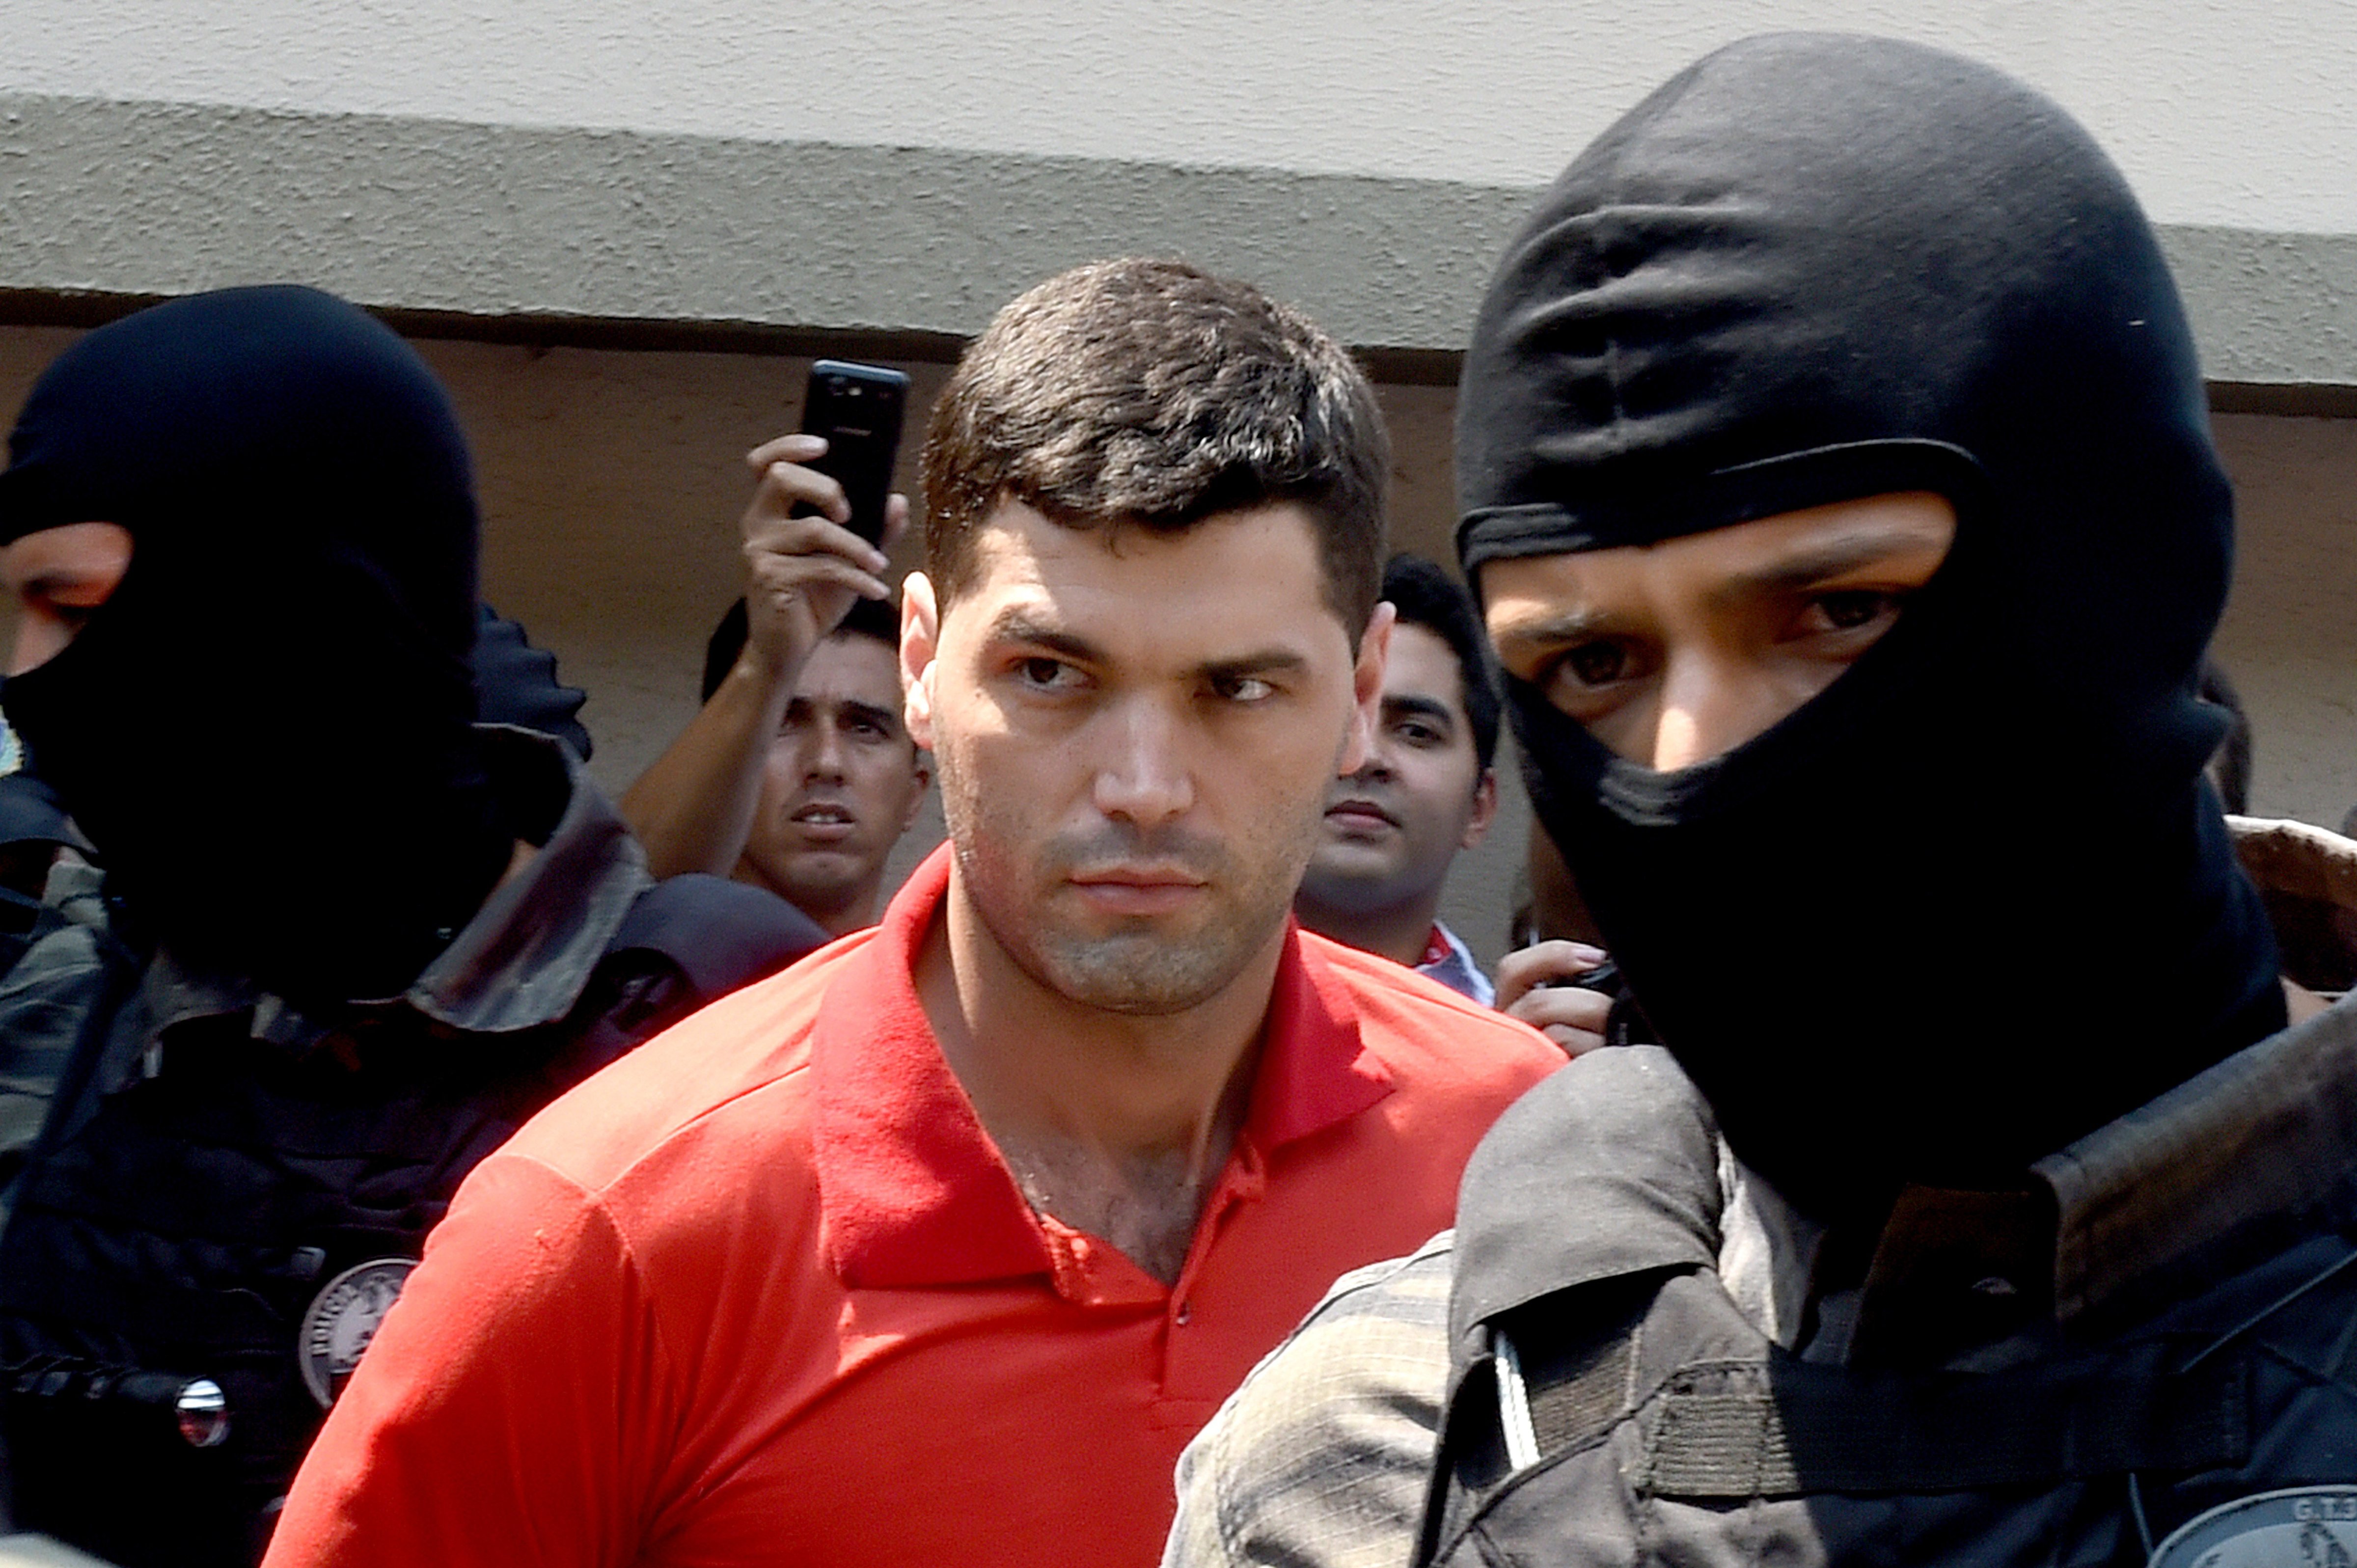 Alleged serial killer Tiago Gomes da Rocha, center, suspected of killing 39 people, is escorted by police officers at the Department of Security, a day after his arrest, in Goiania, state of Goias, Brazil, on Oct. 16, 2014. (Evaristo Sa—AFP/Getty Images)